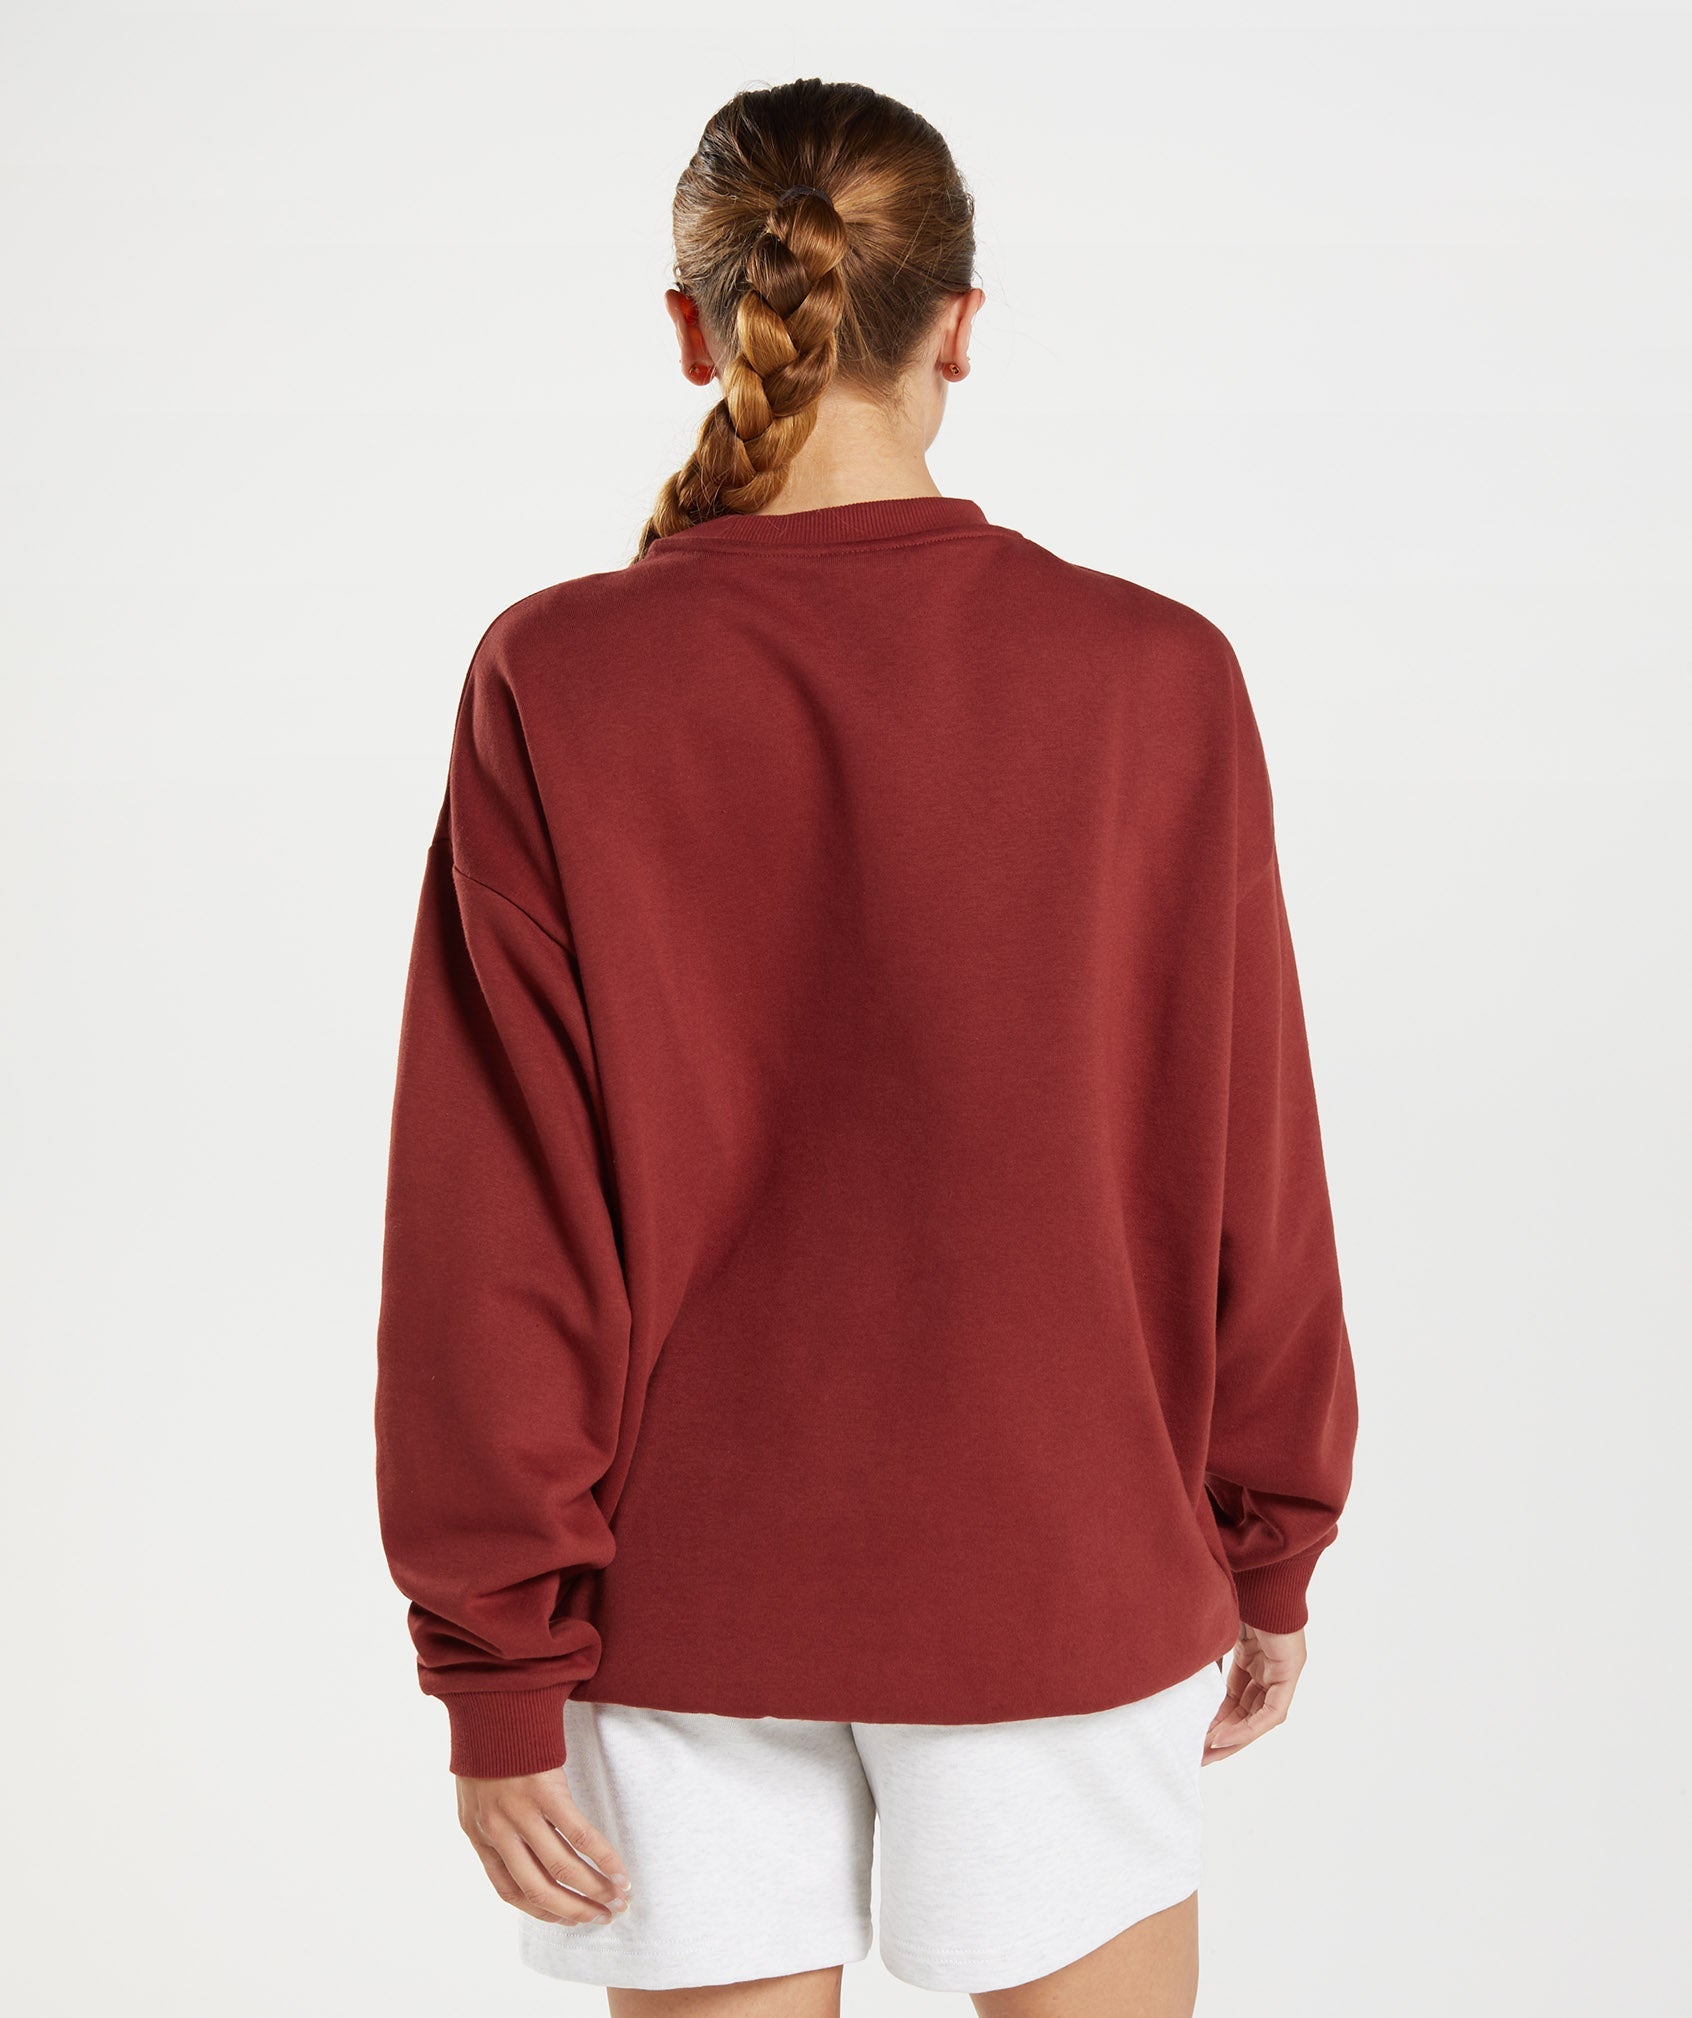 Training Oversized Sweatshirt in Rosewood Red - view 2